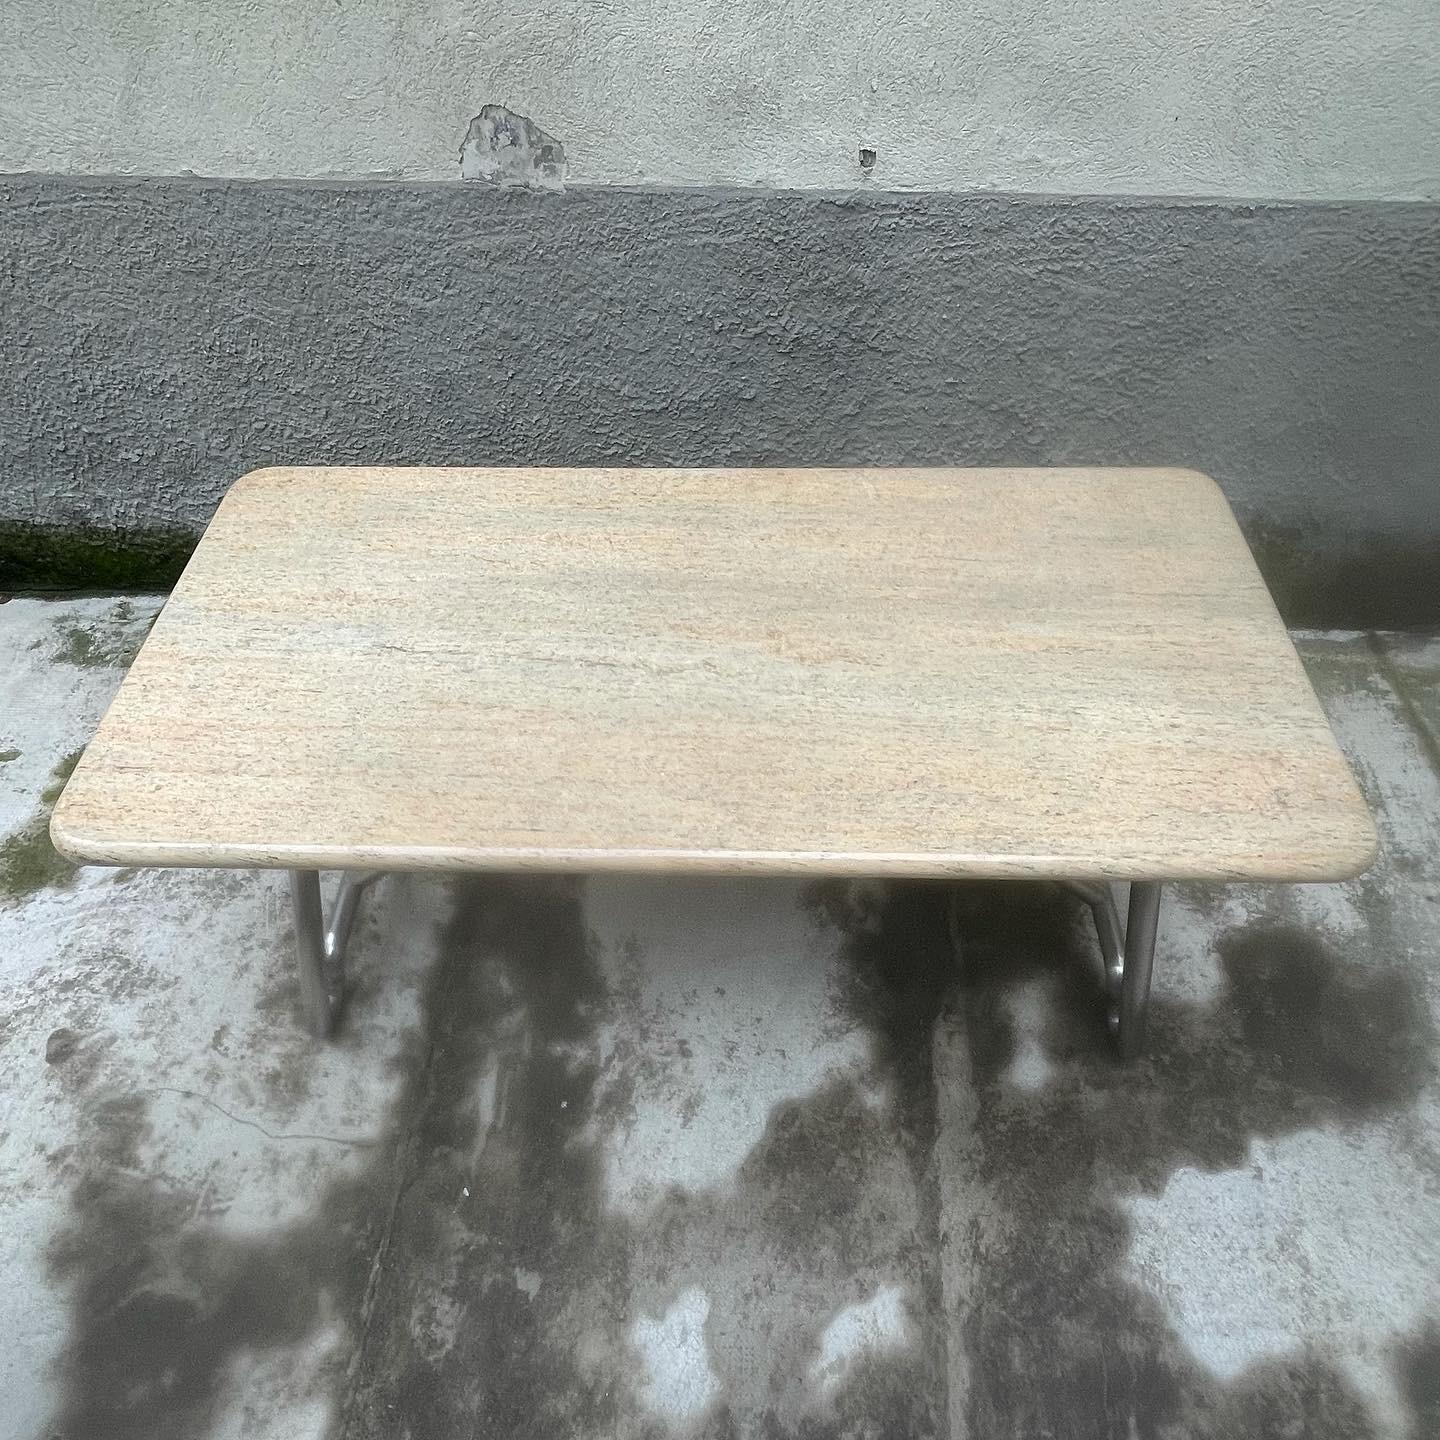 Italian Marble Table with Multicurve Steel Frame - Italy - 1970s For Sale